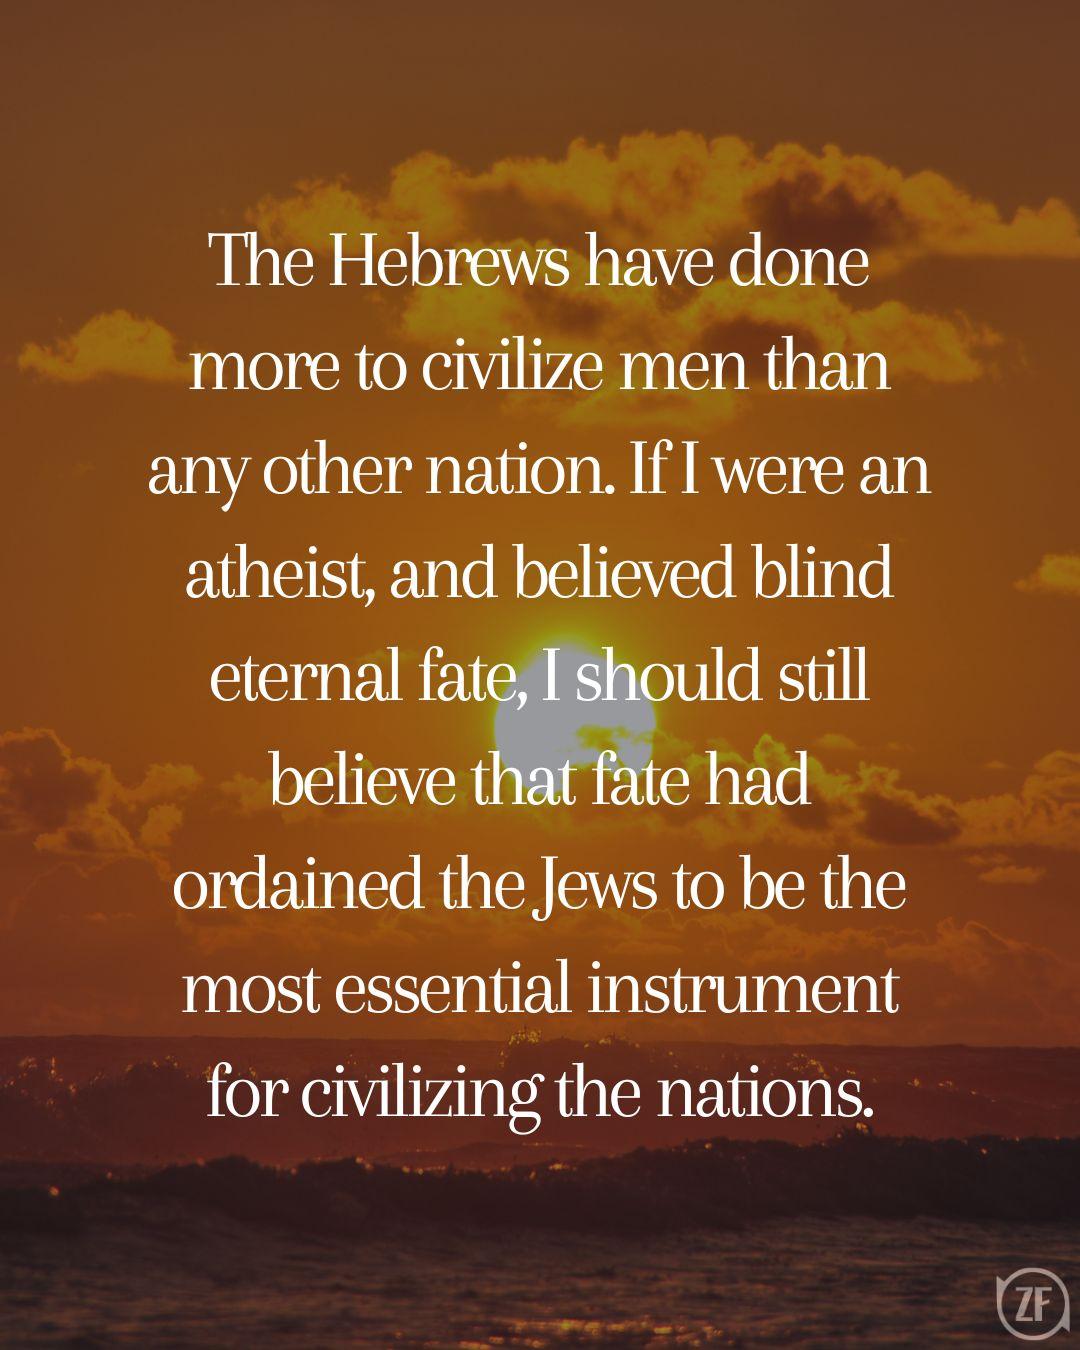 The Hebrews have done more to civilize men than any other nation. If I were an atheist, and believed blind eternal fate, I should still believe that fate had ordained the Jews to be the most essential instrument for civilizing the nations.